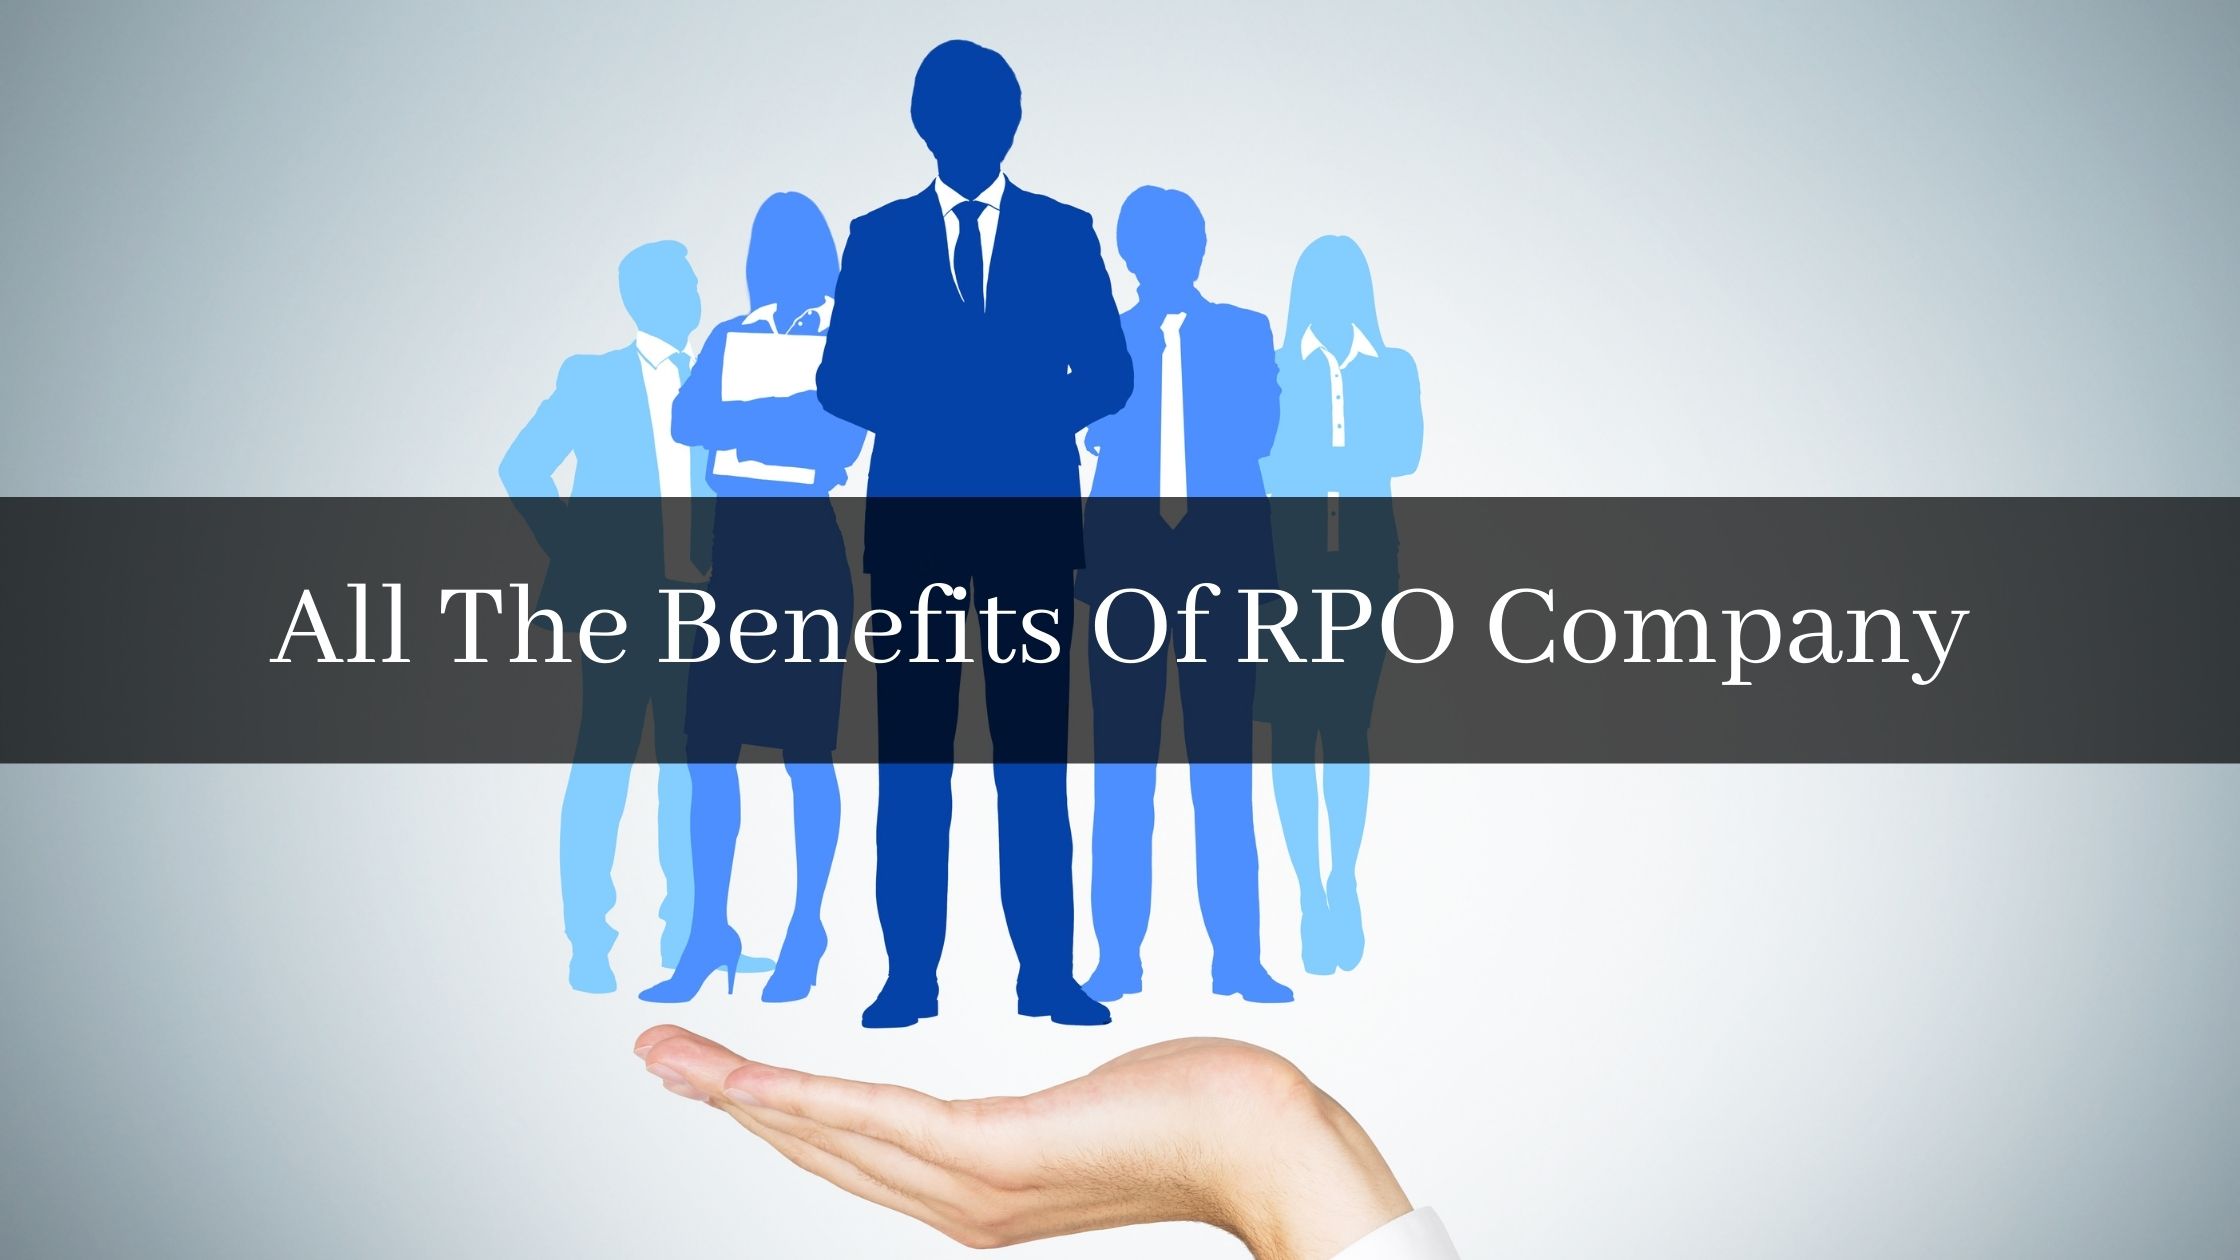 All The Benefits Of RPO Company